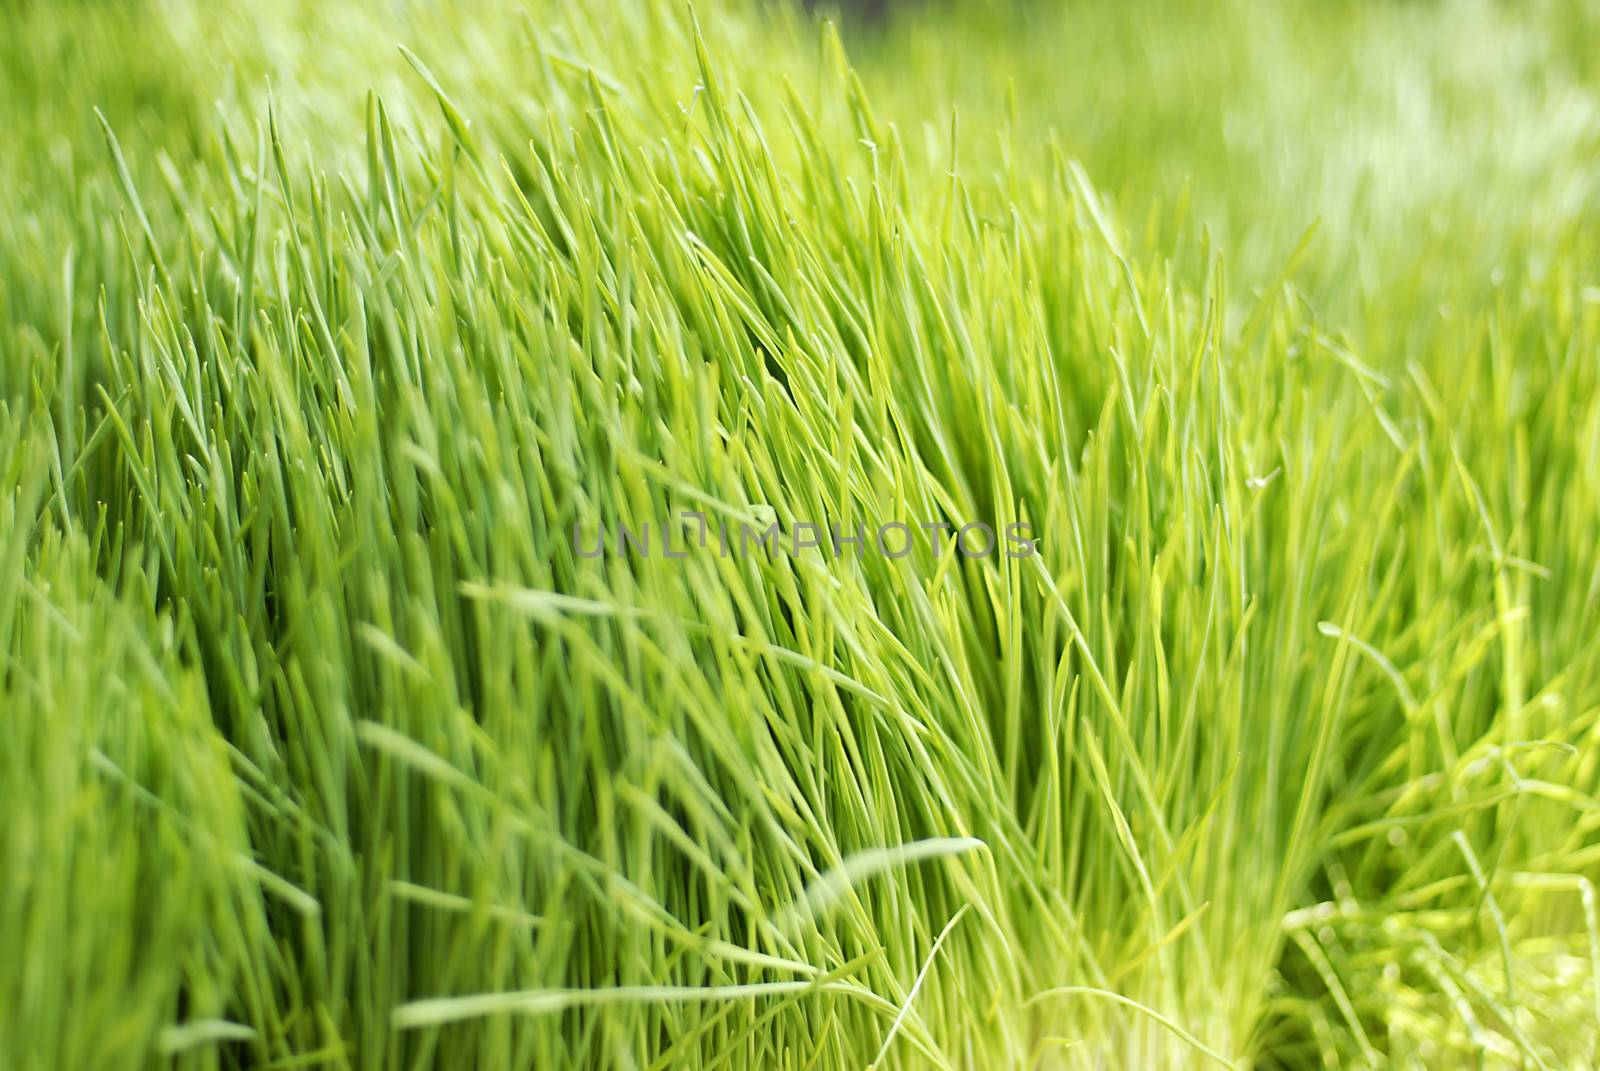 Young juicy green sprouts of the wheat